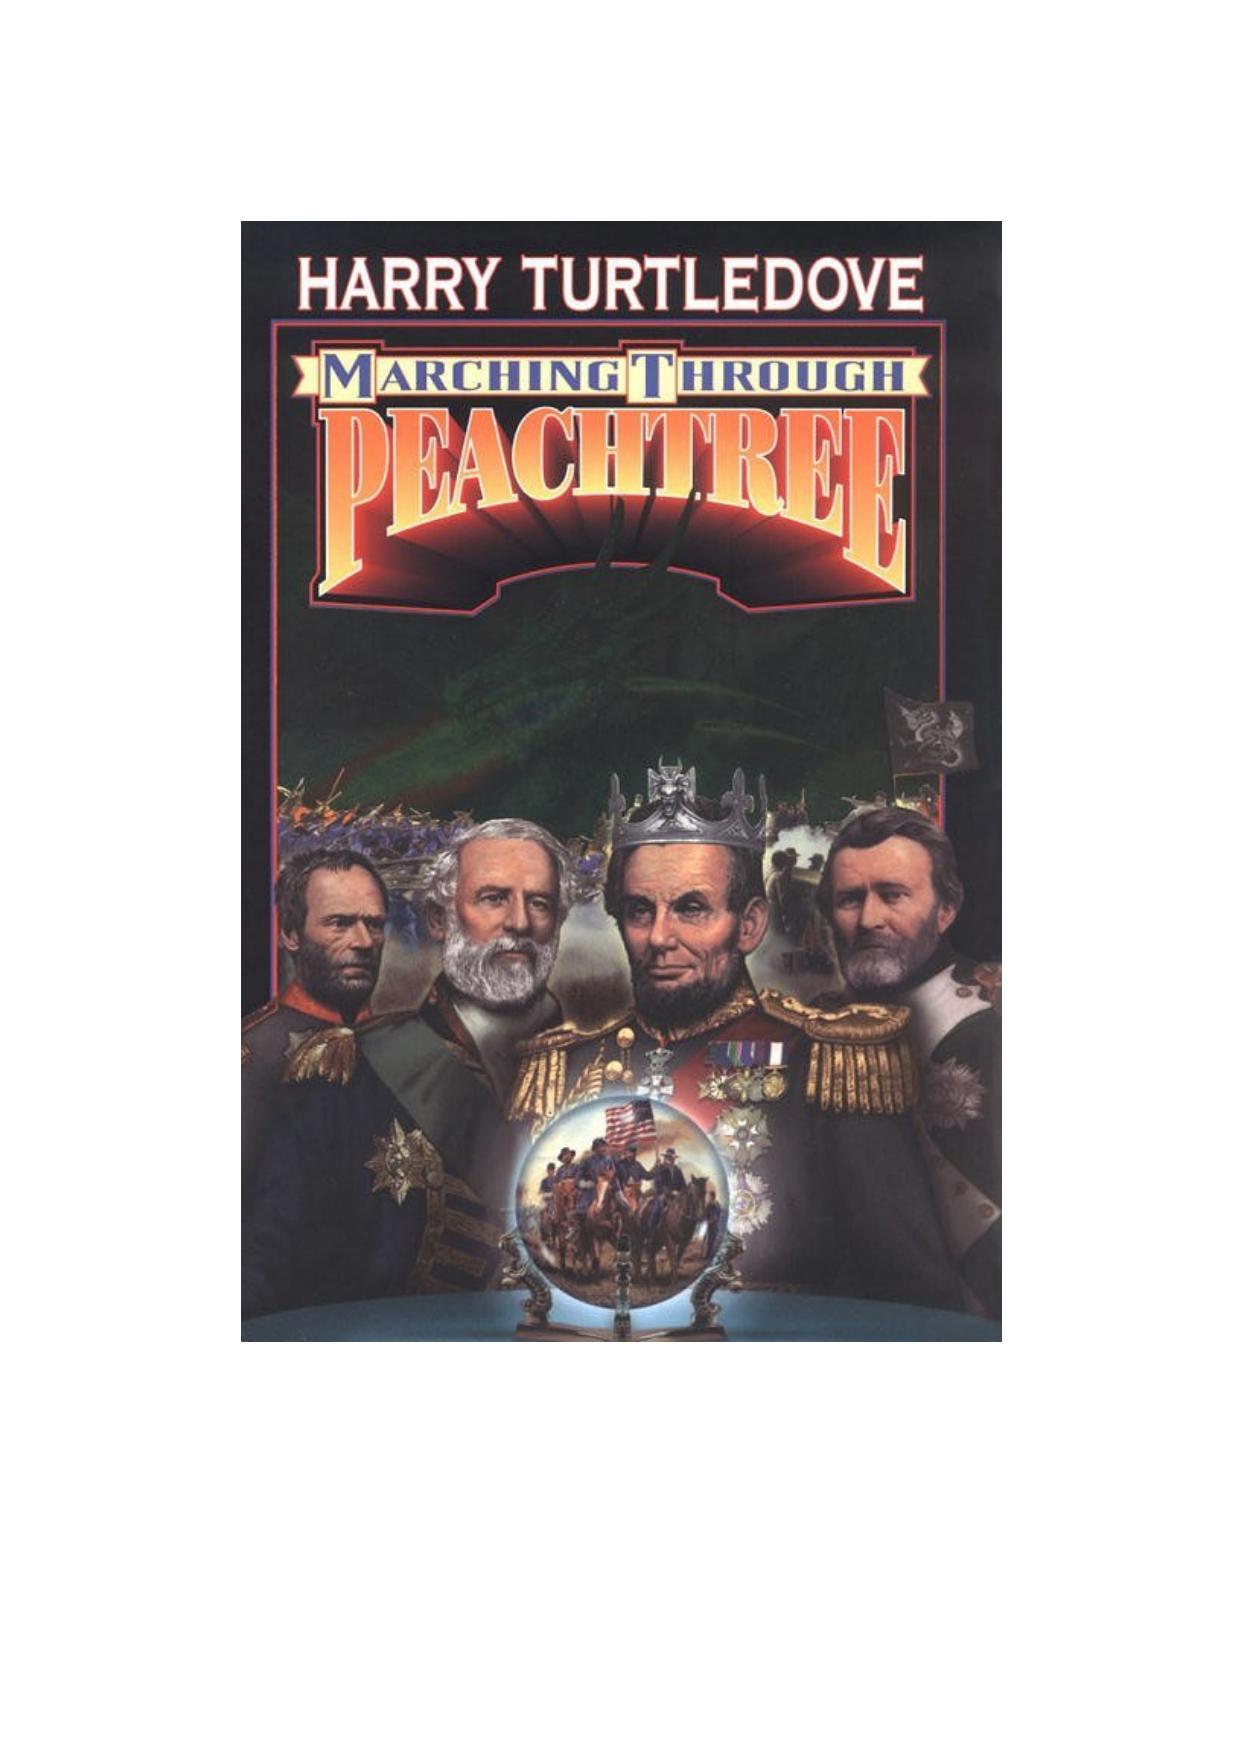 Turtledove, Harry - War of the Provinces 02 - Marching Through Peachtree by Turtledove Harry